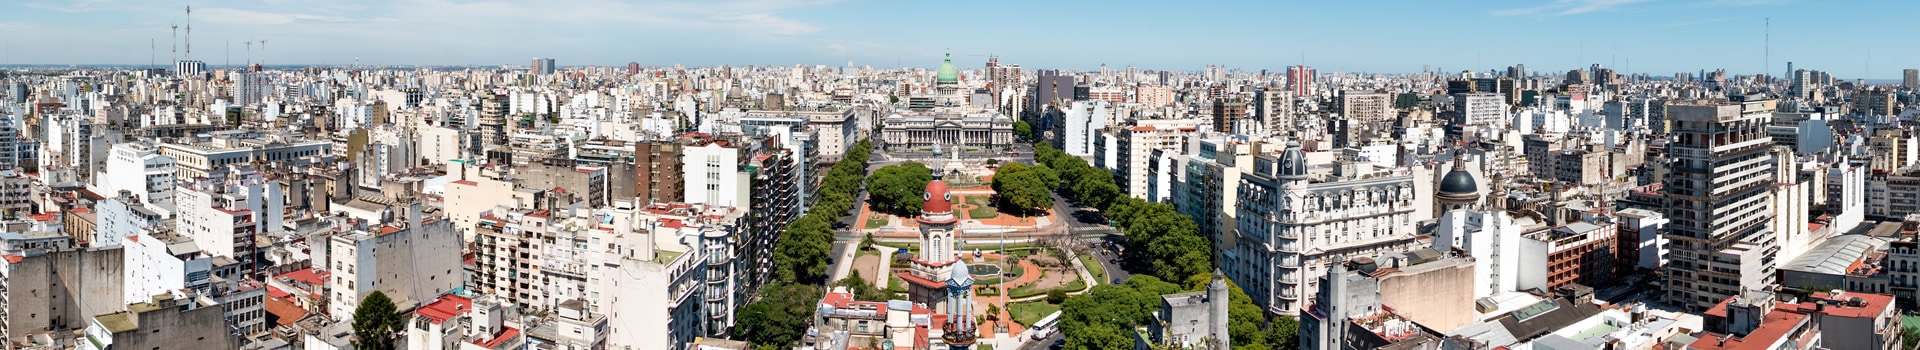 Barcelone - Buenos aires intl